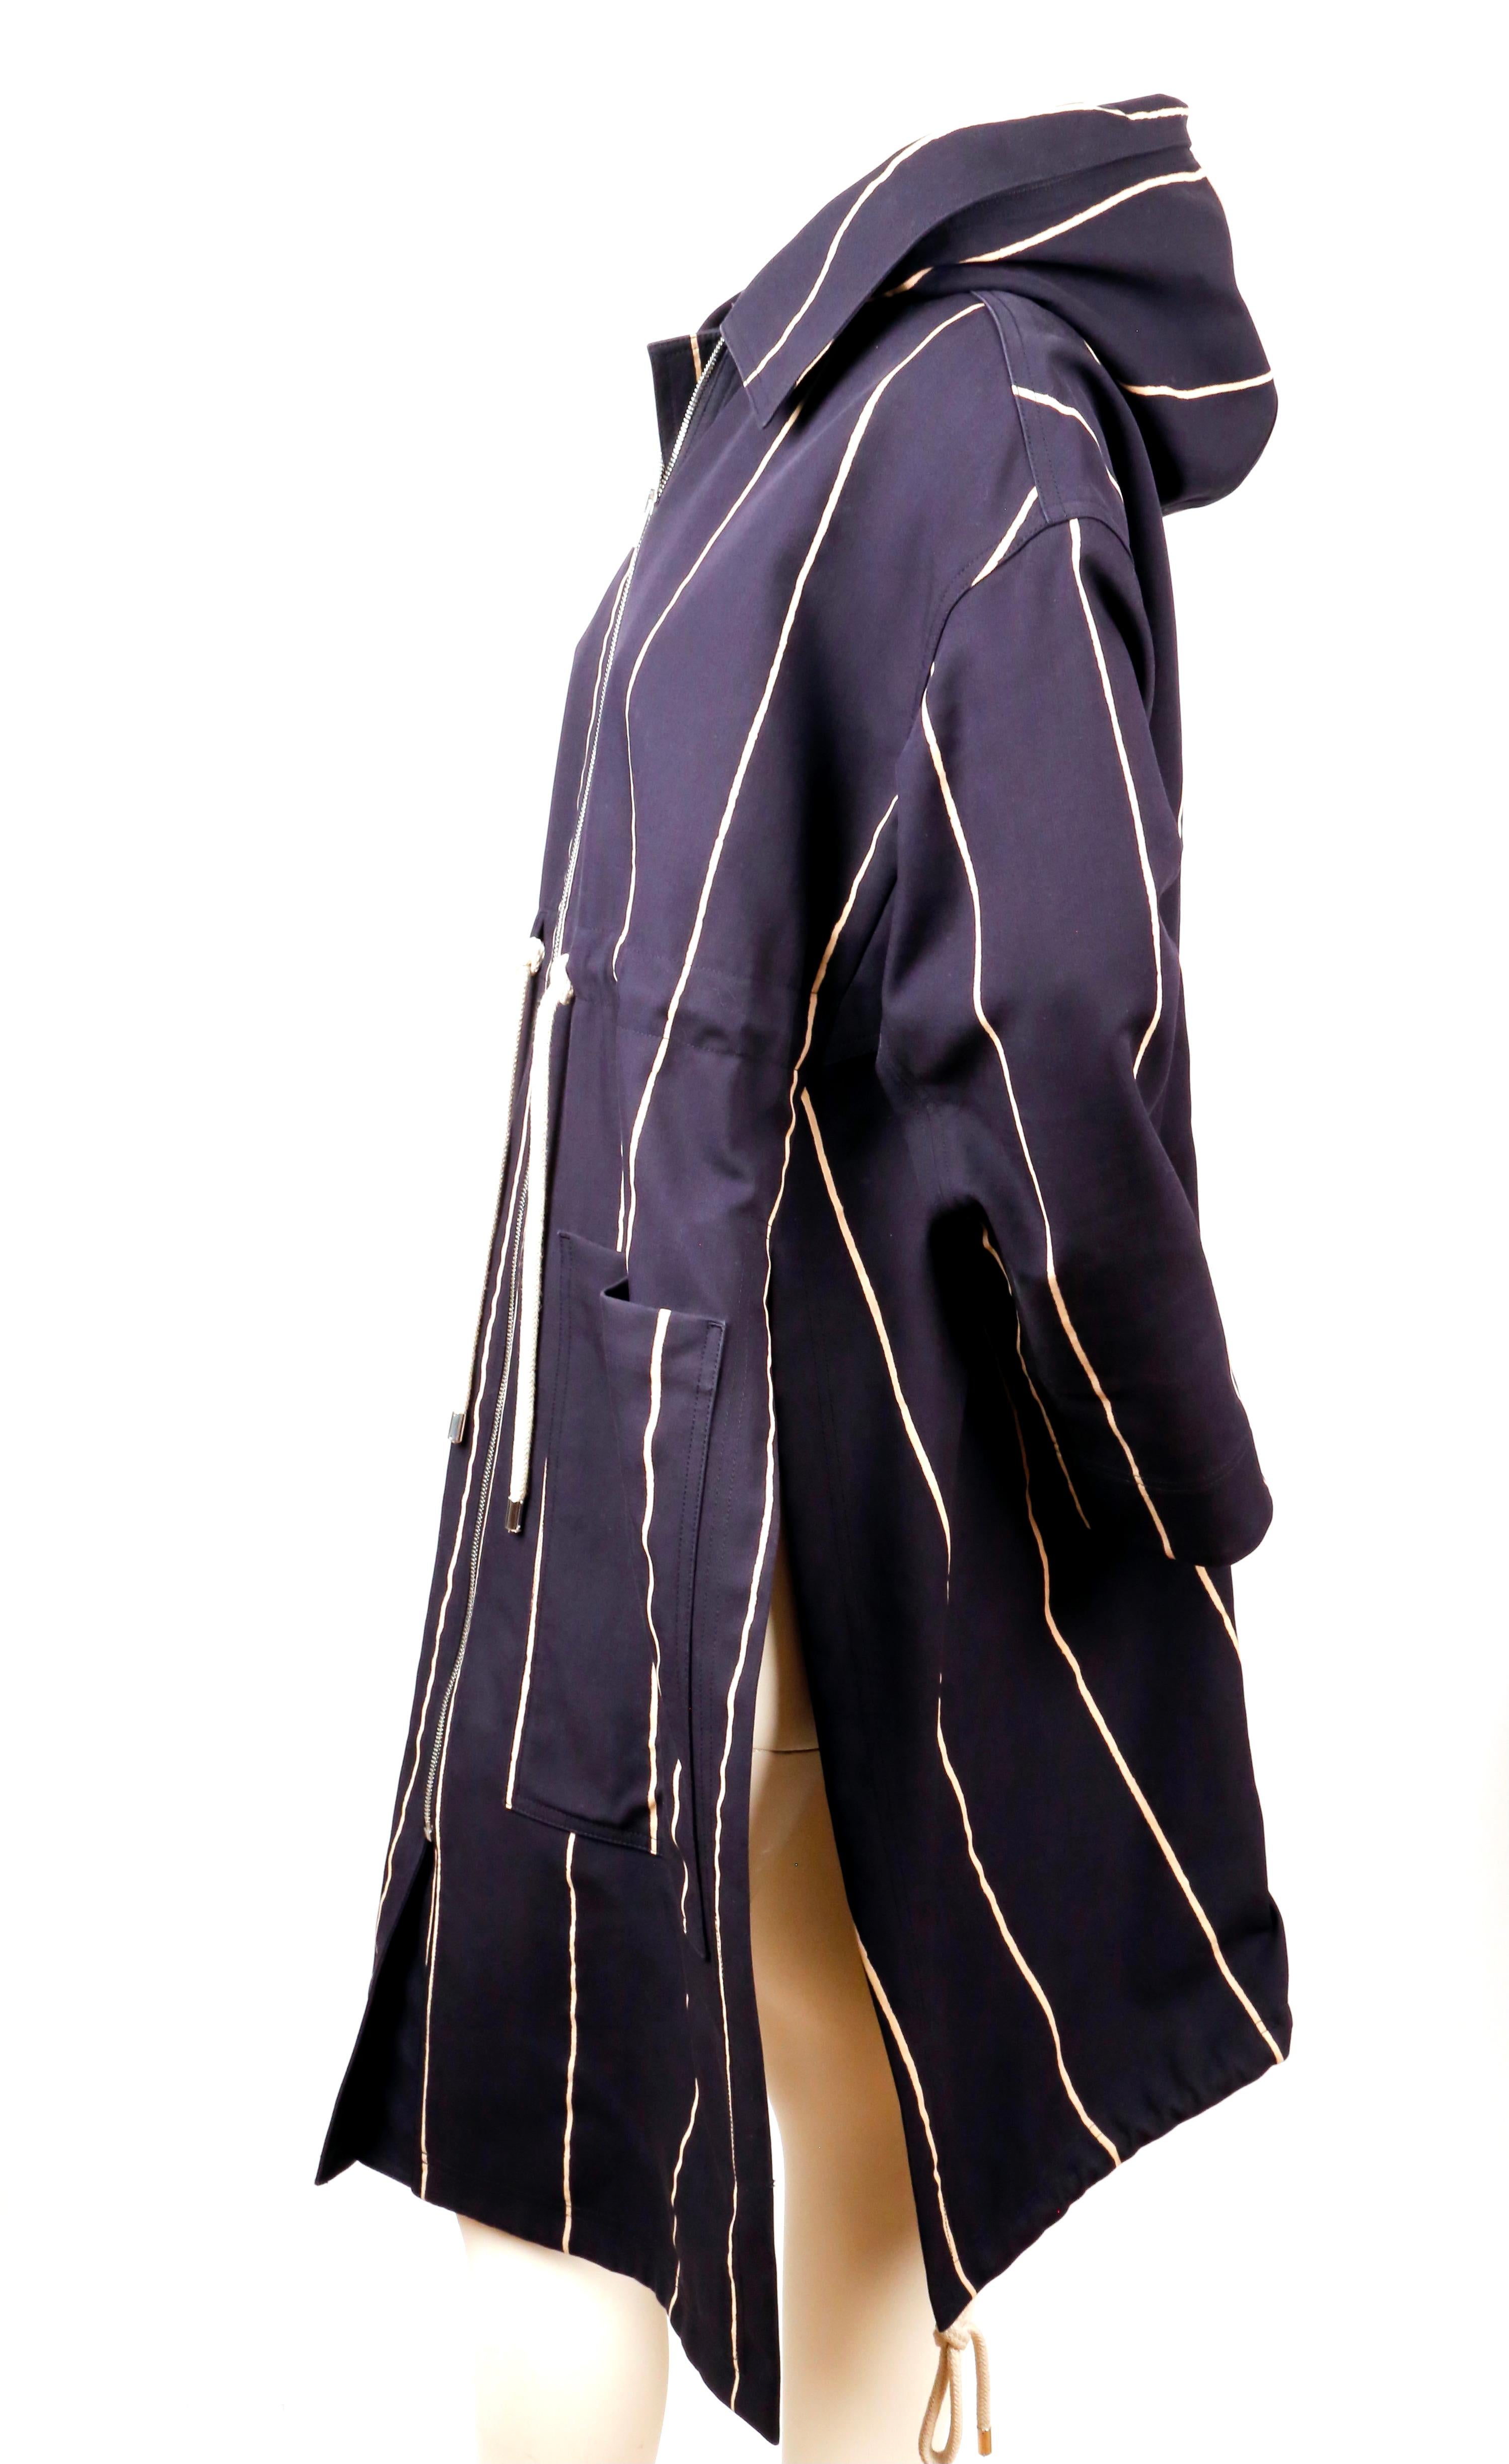 CELINE by PHOEBE PHILO navy draped coat with hood - resort 2016 In Good Condition For Sale In San Fransisco, CA